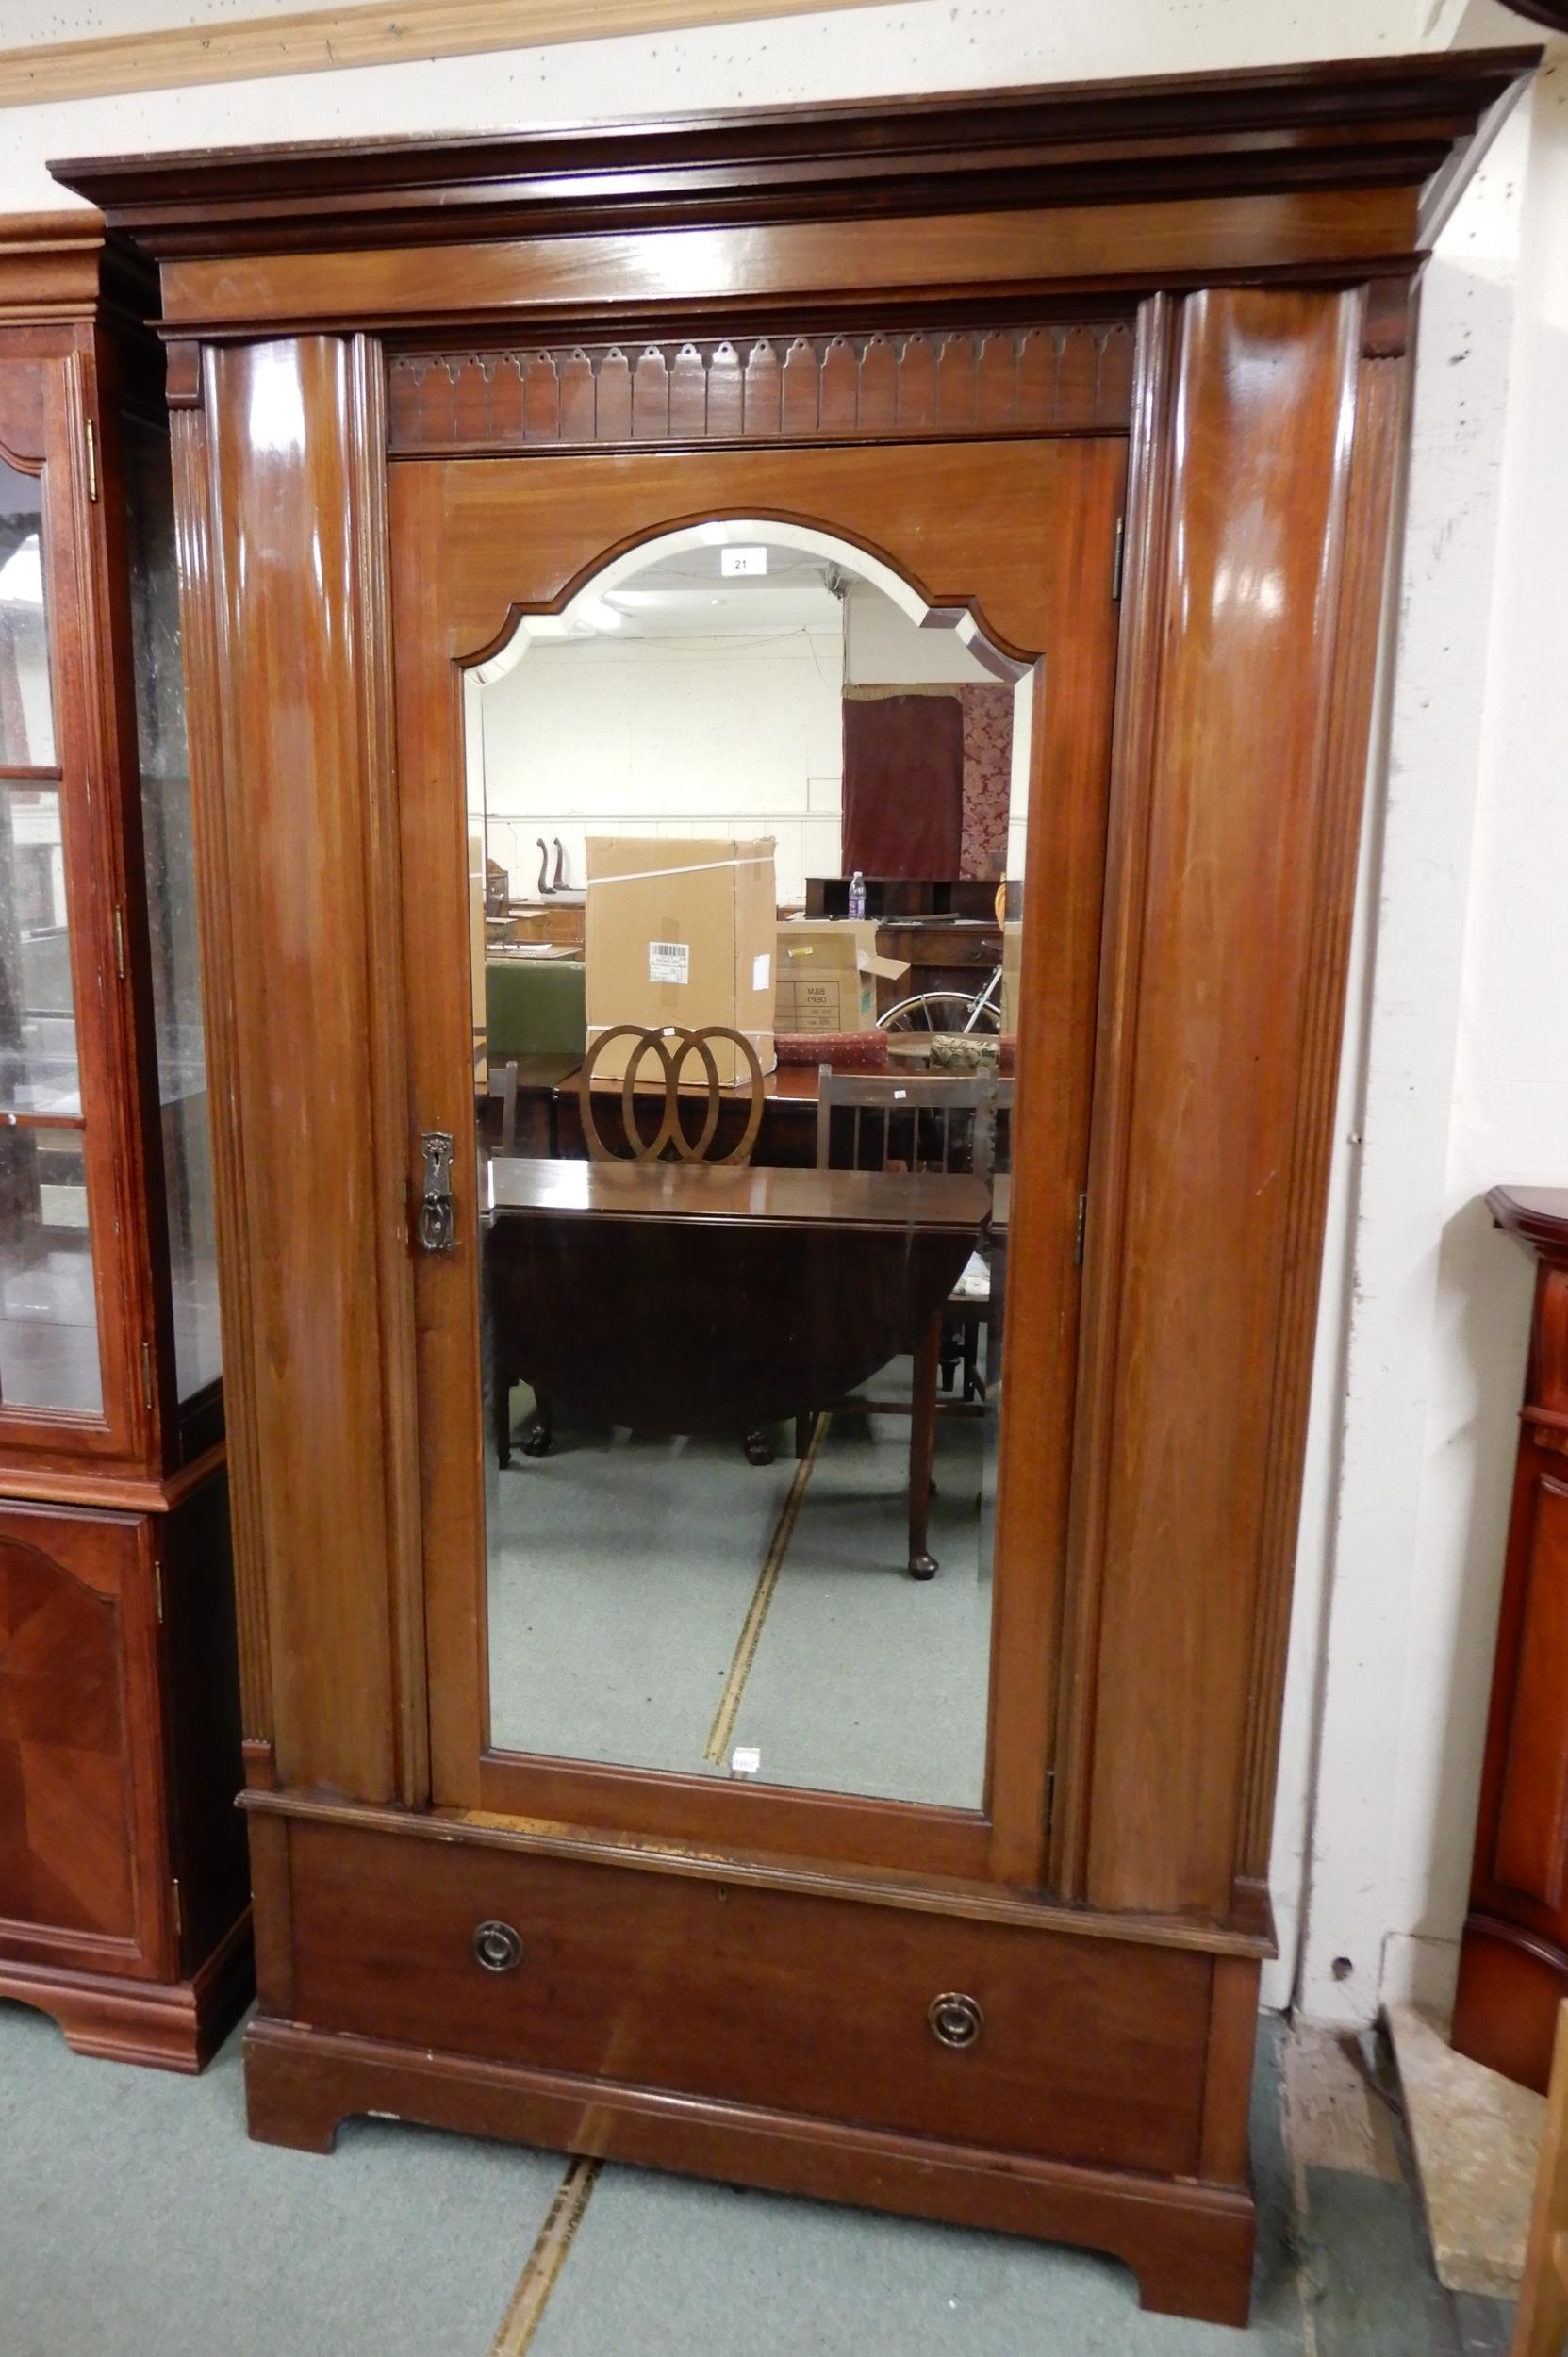 A late Victorian mahogany wardrobe with moulded cornice over single mirrored door over single drawer